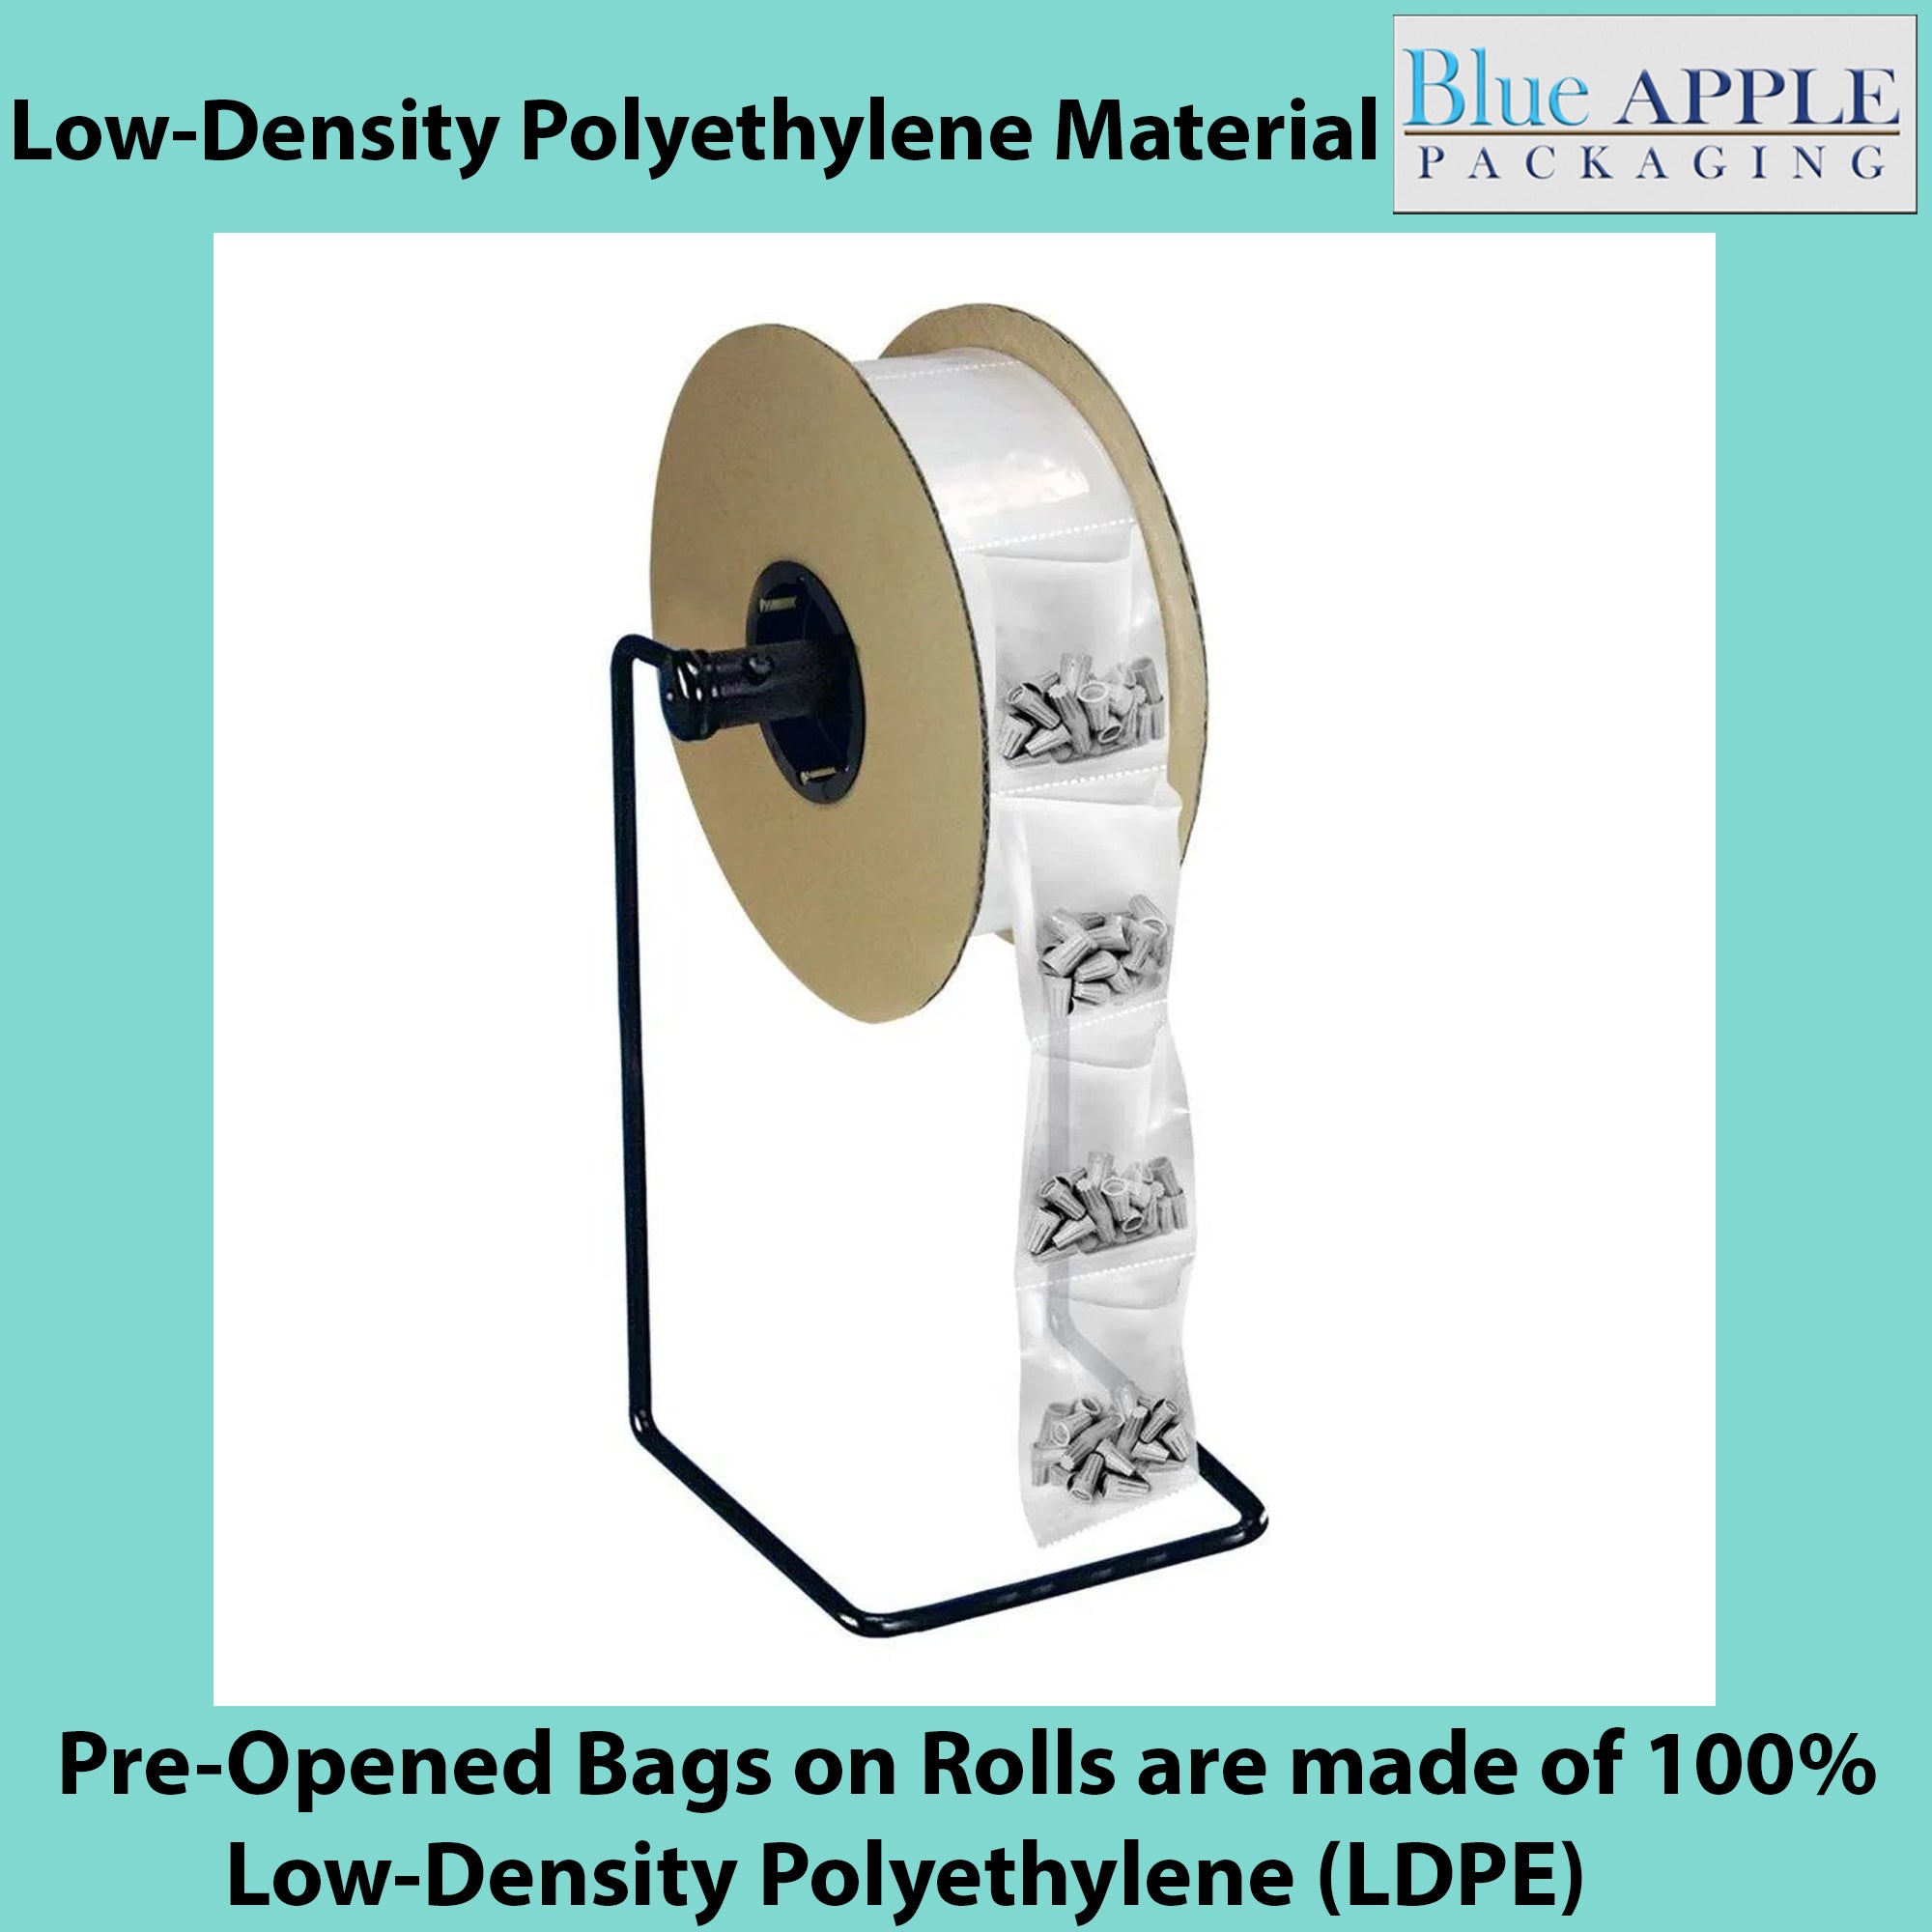 Clear Perforated Roll Auto Fill Poly Bags - 4"x6", 1.4 Mil - 2500 Bags